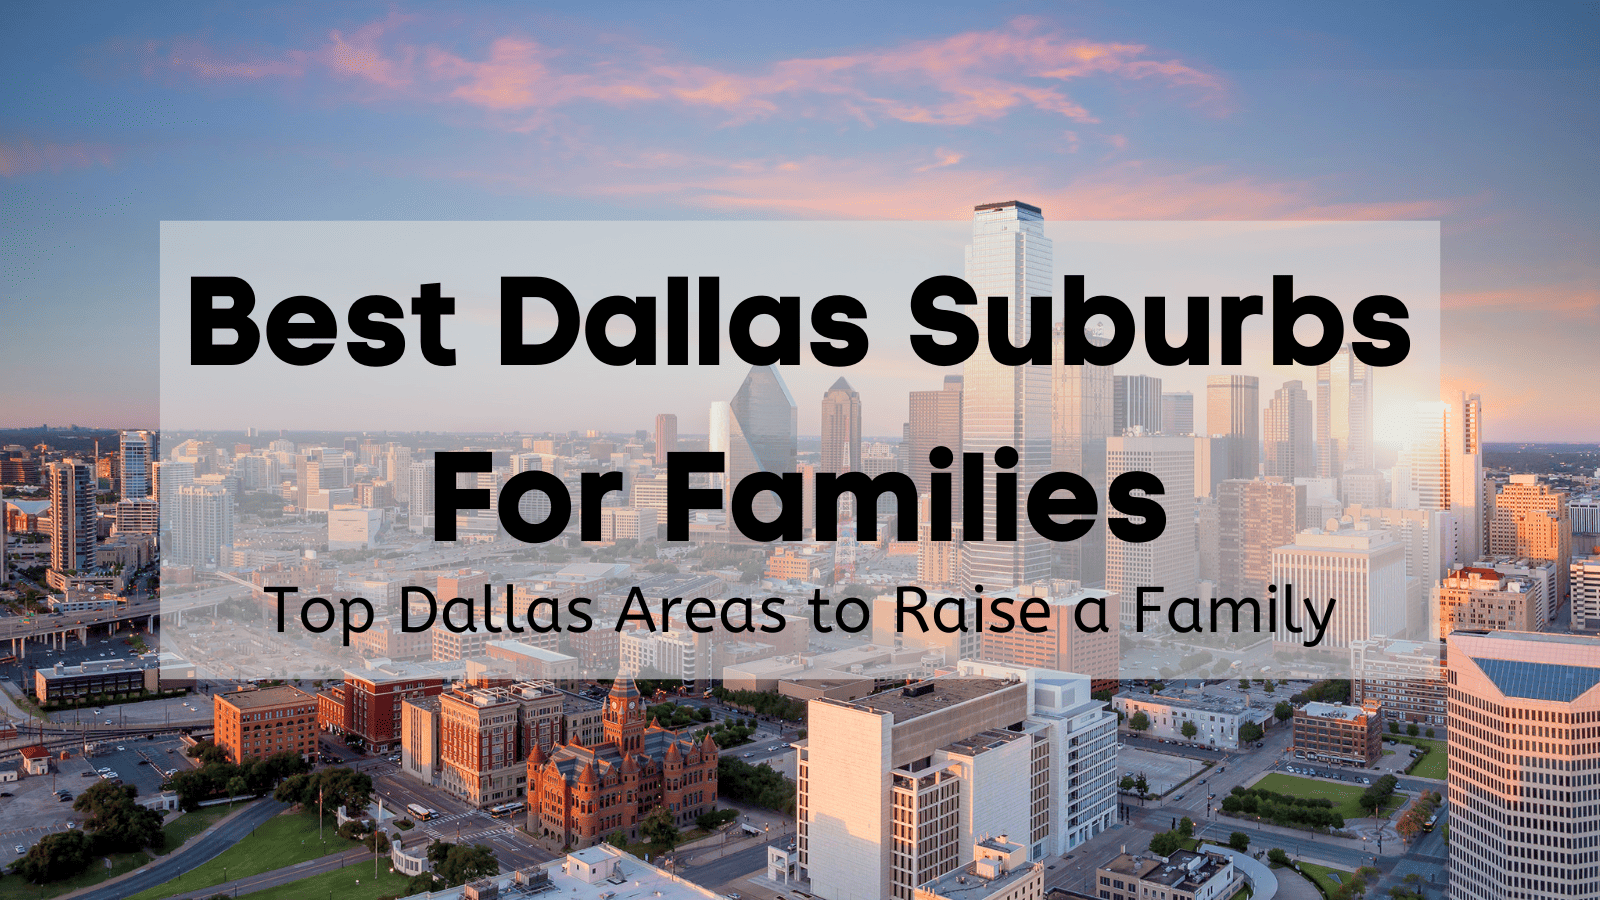 Best Dallas Suburbs For Families